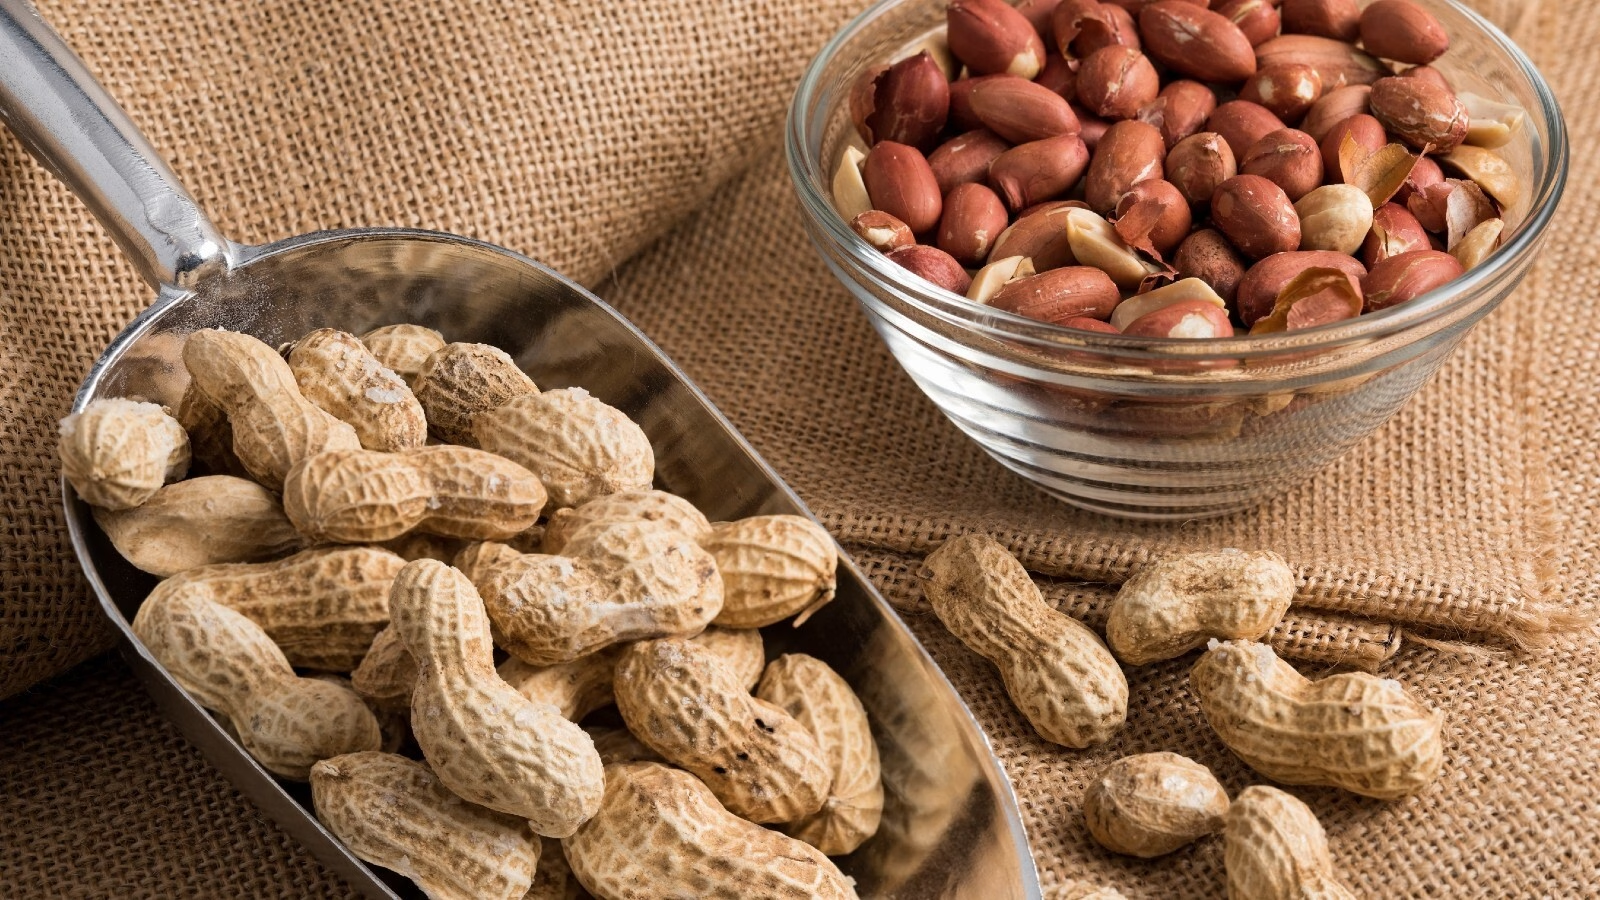 Side Effects Of Eating Groundnuts